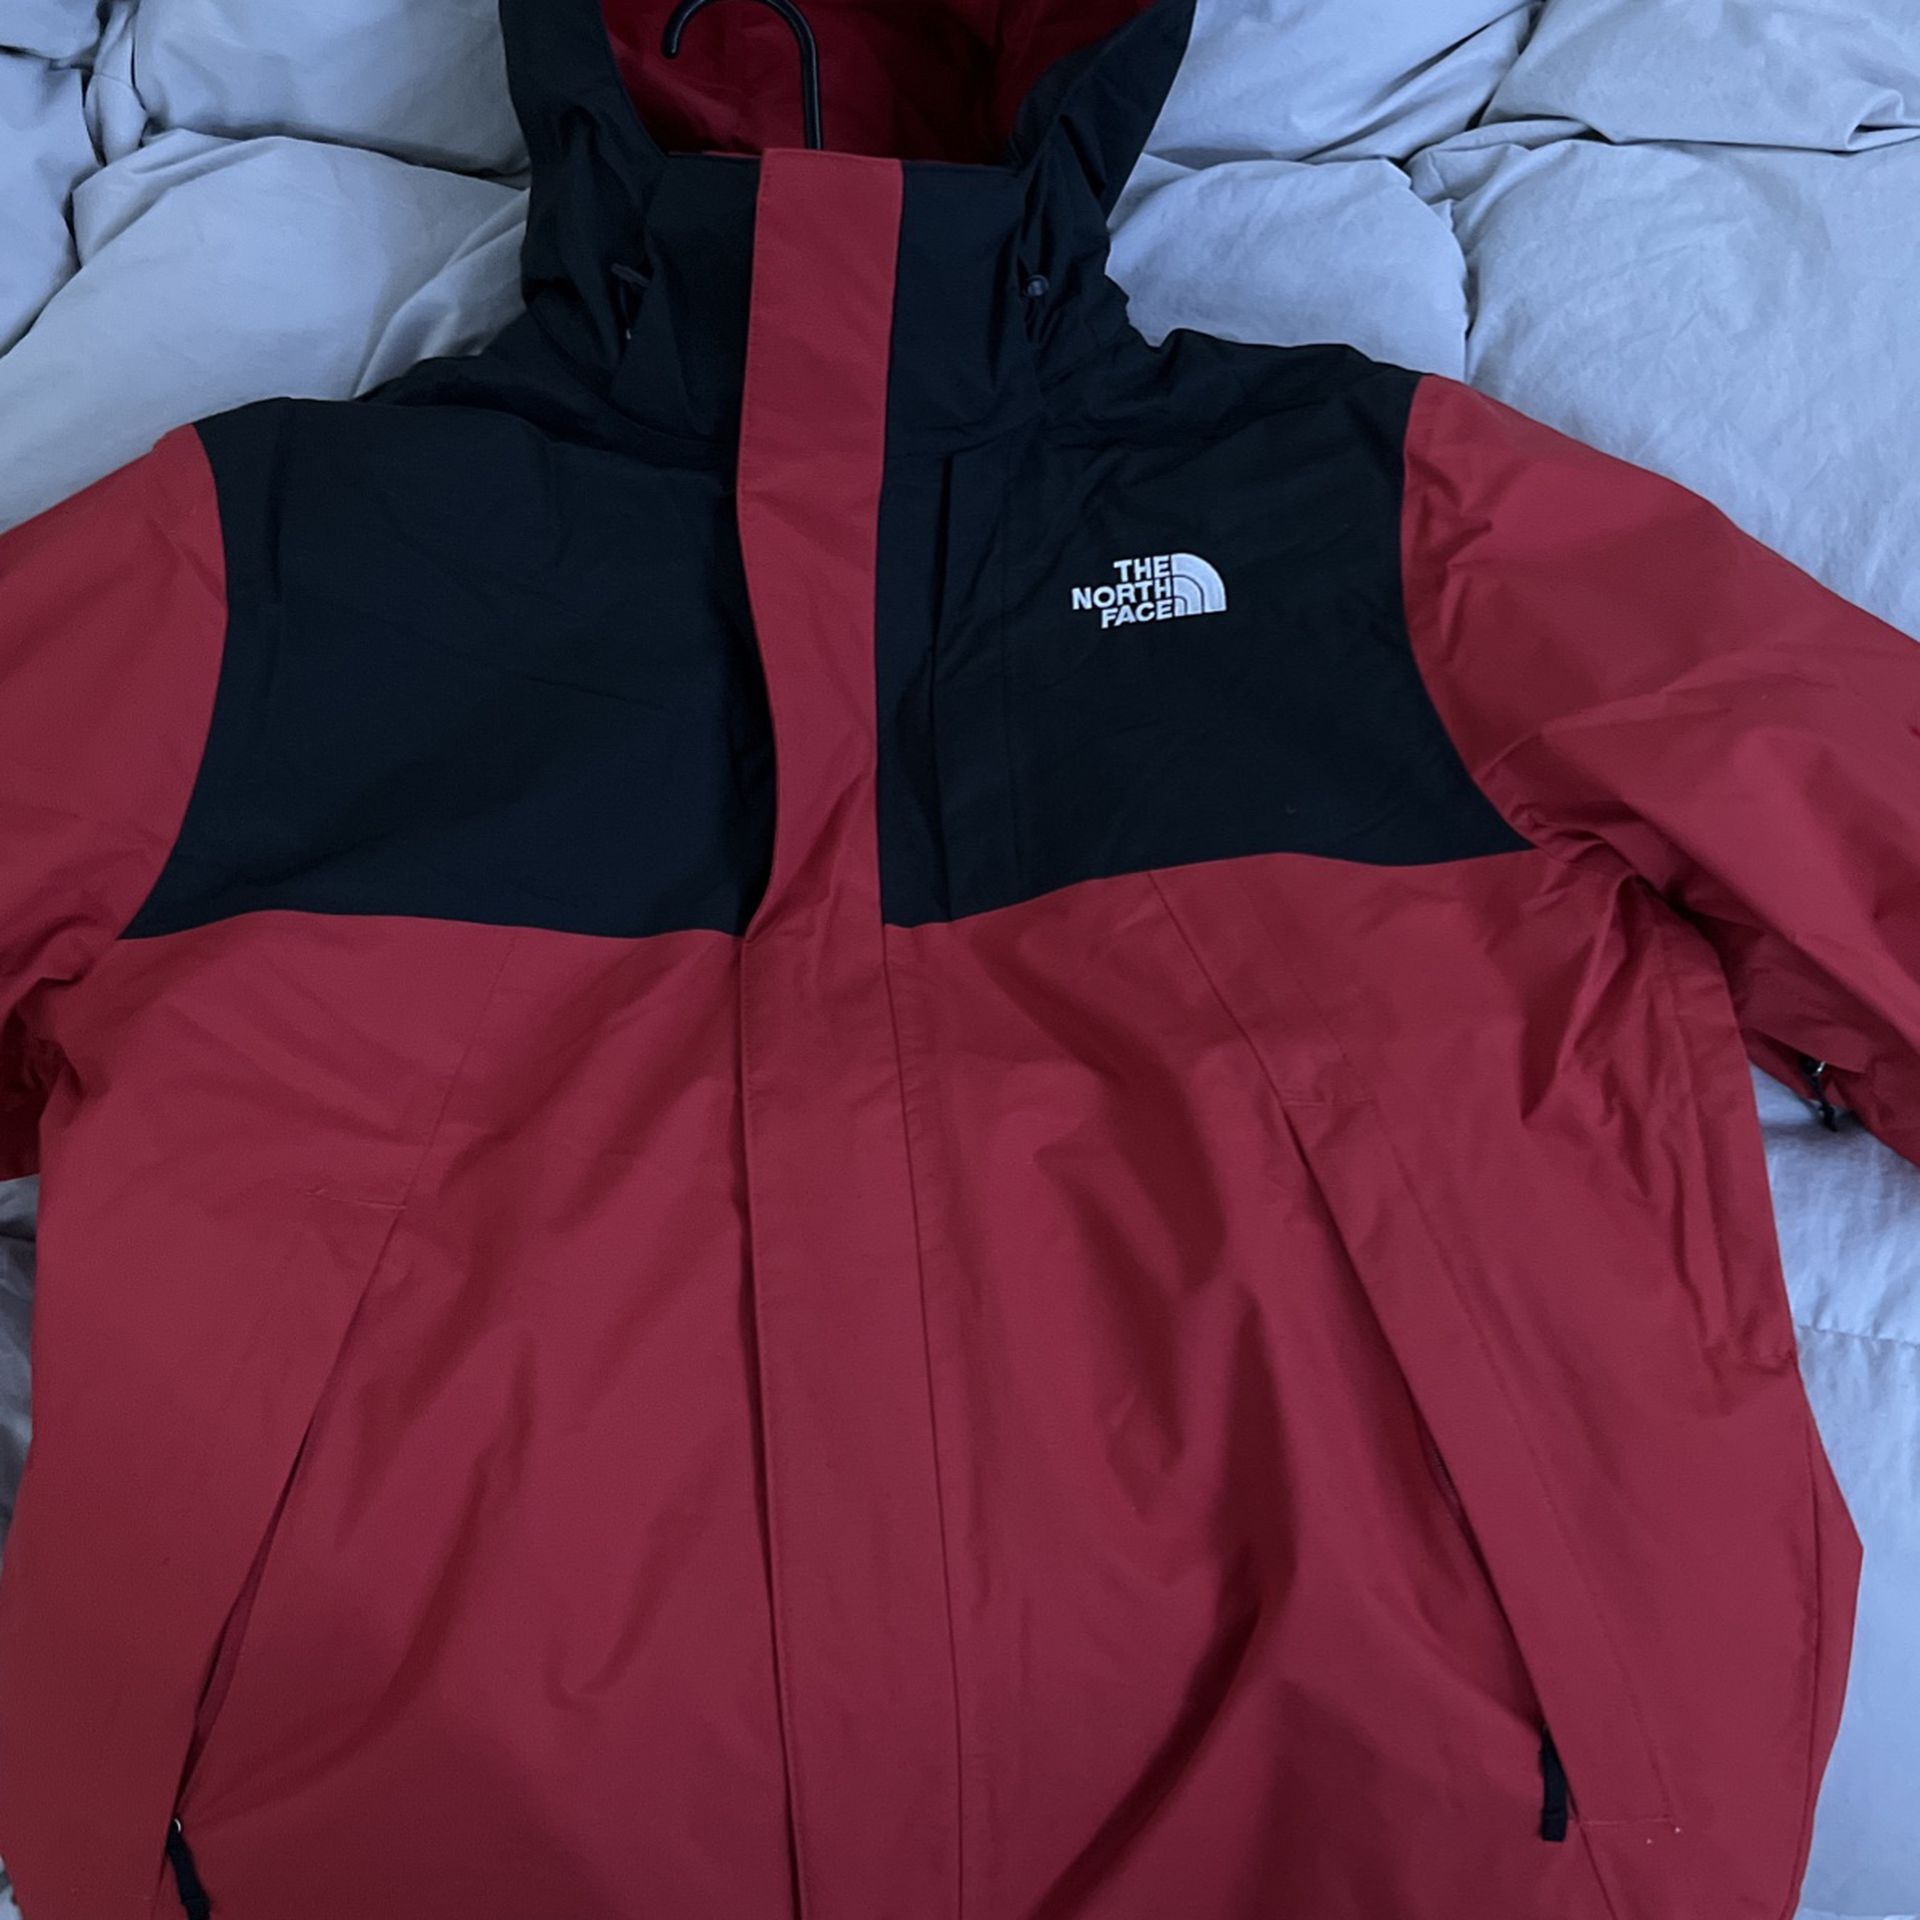 The North Face Coat. 